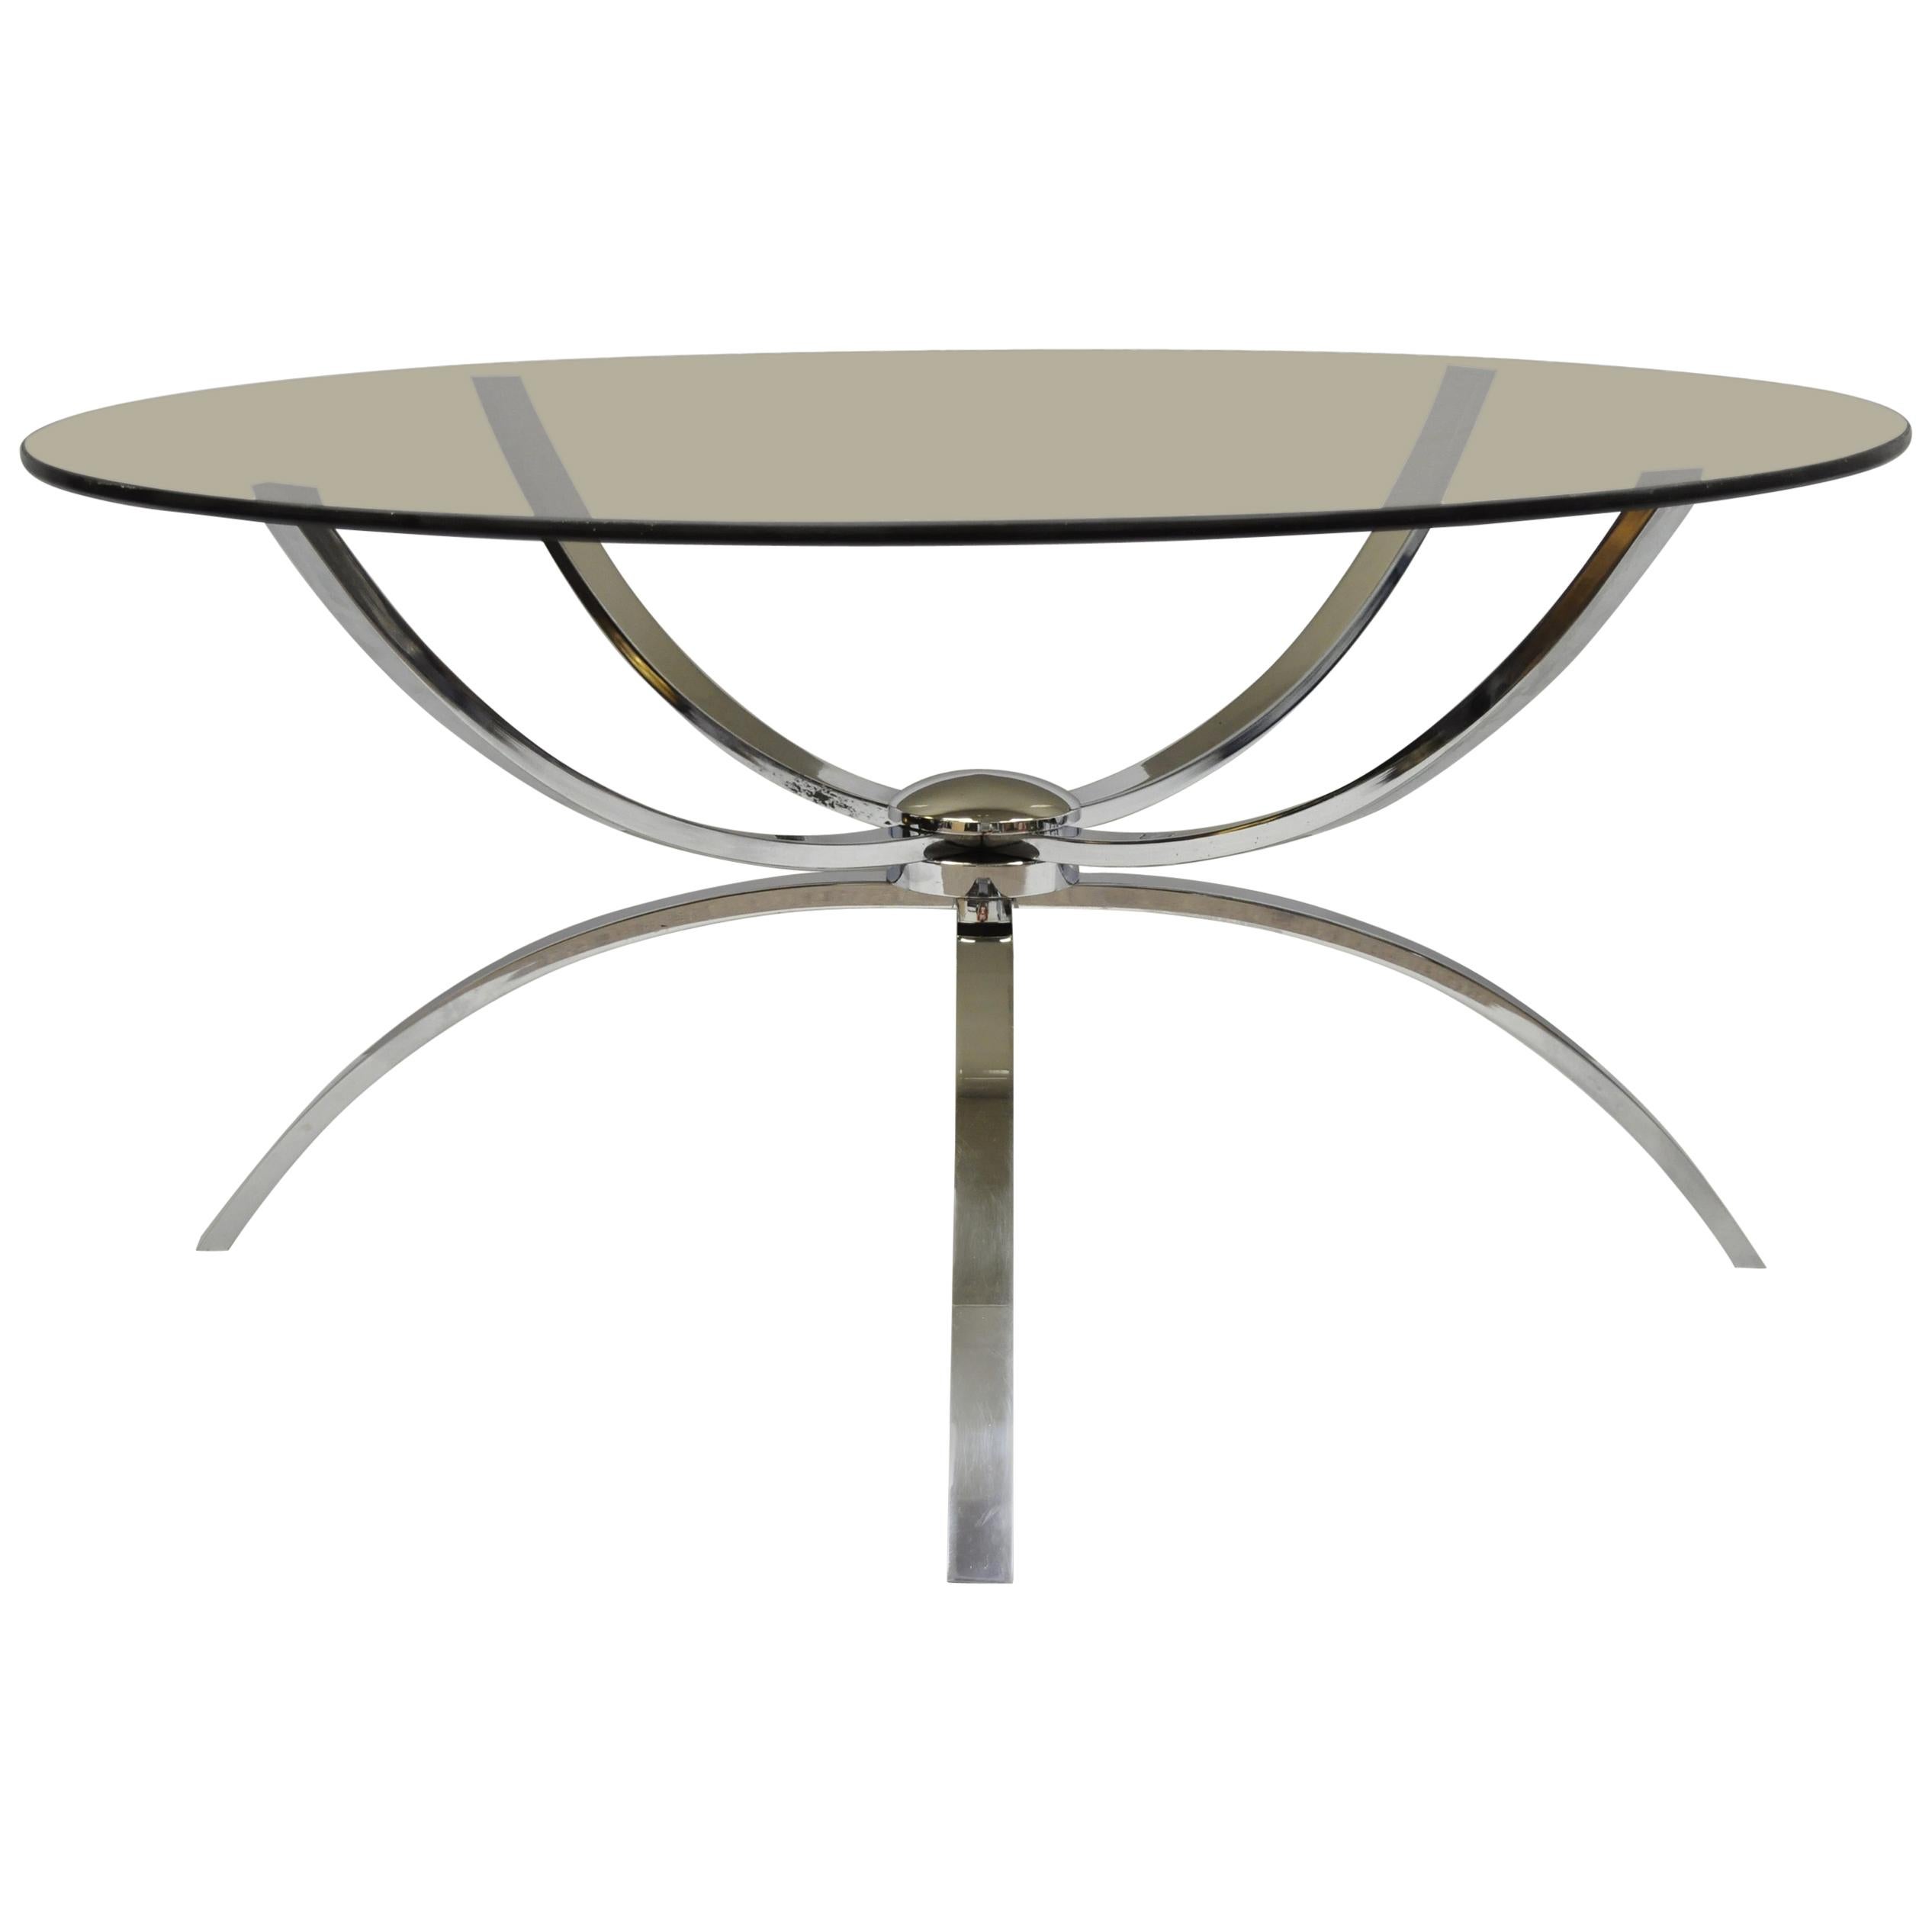 Midcentury Italian Modern Chrome Steel Spider Base Round Glass Top Coffee Table